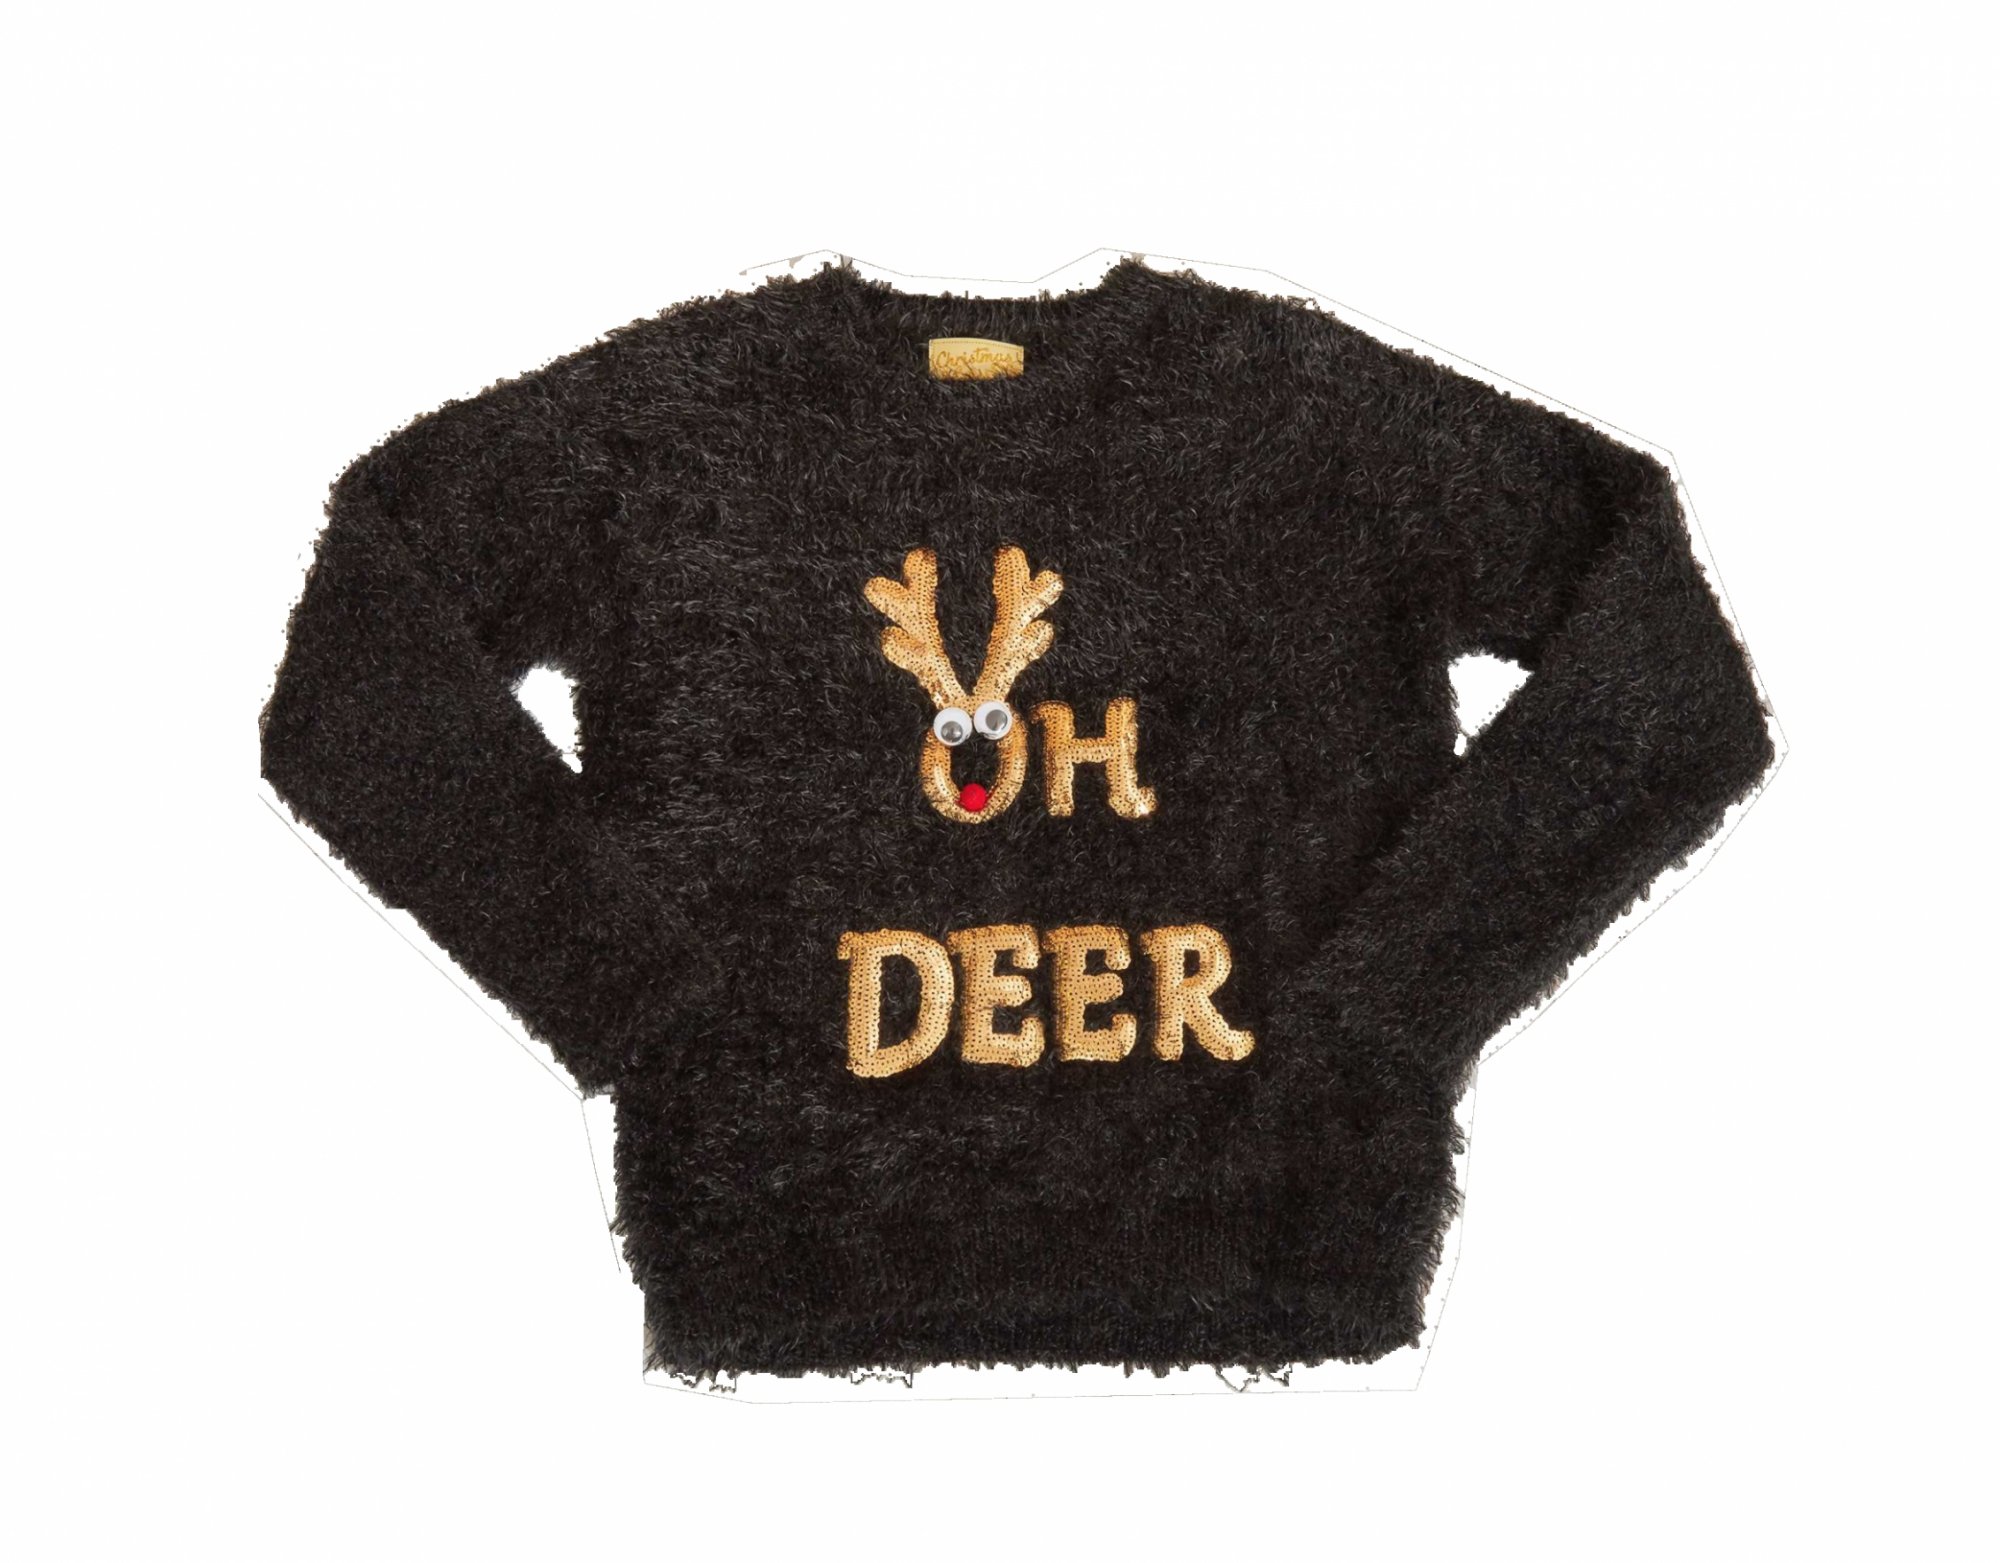 black hairy effect sweater with glittered reindeer